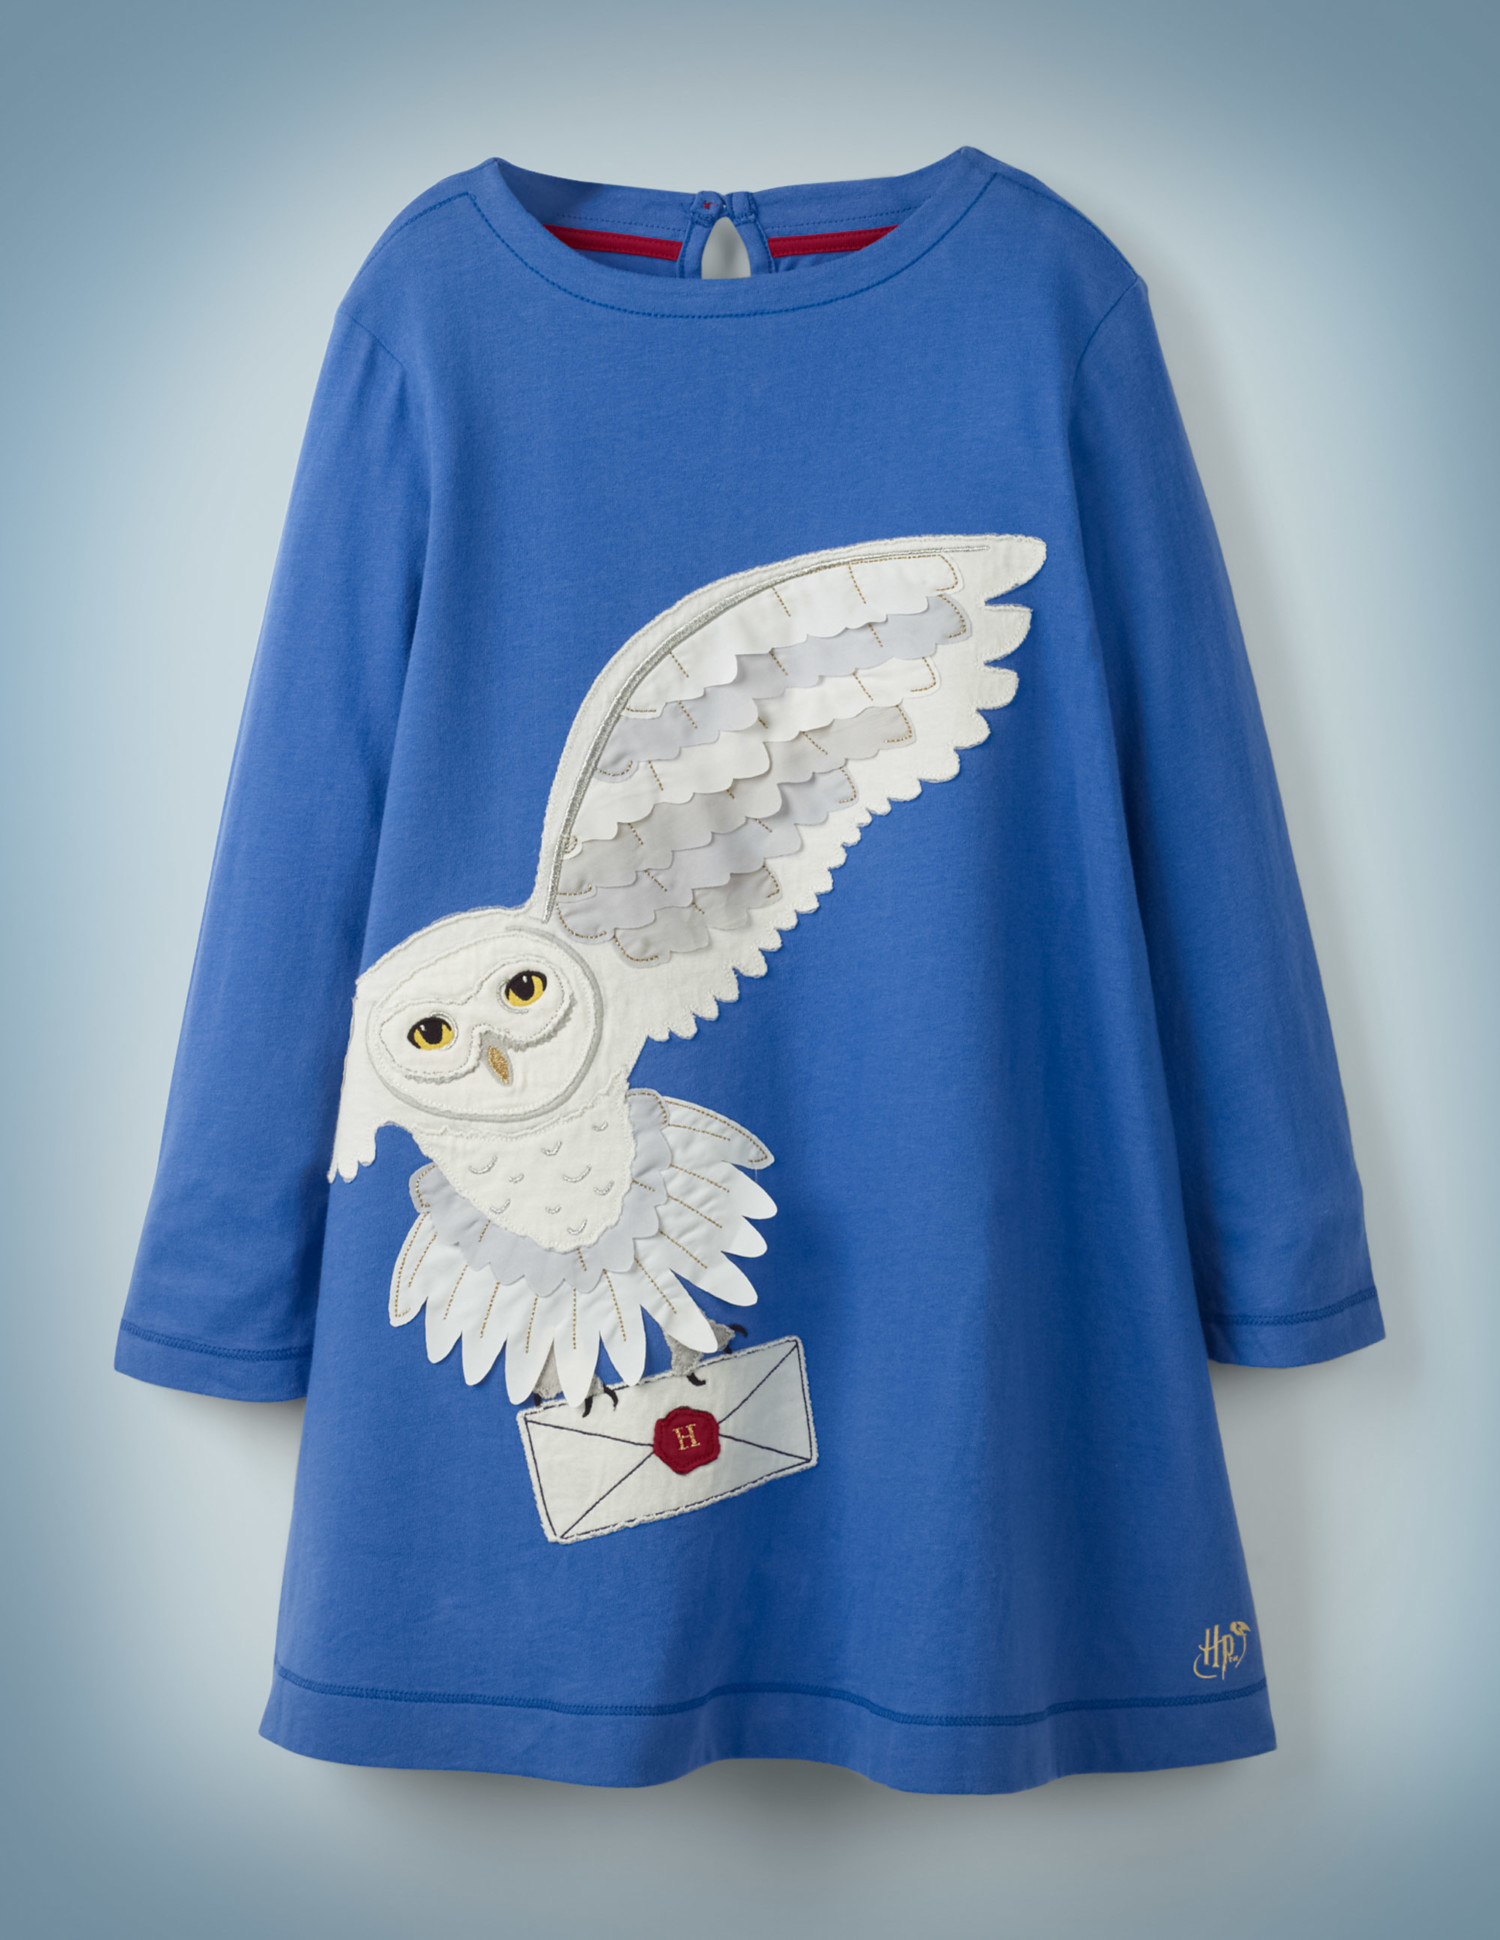 Mini Boden just dropped the CUTEST Harry Potter kids' clothing